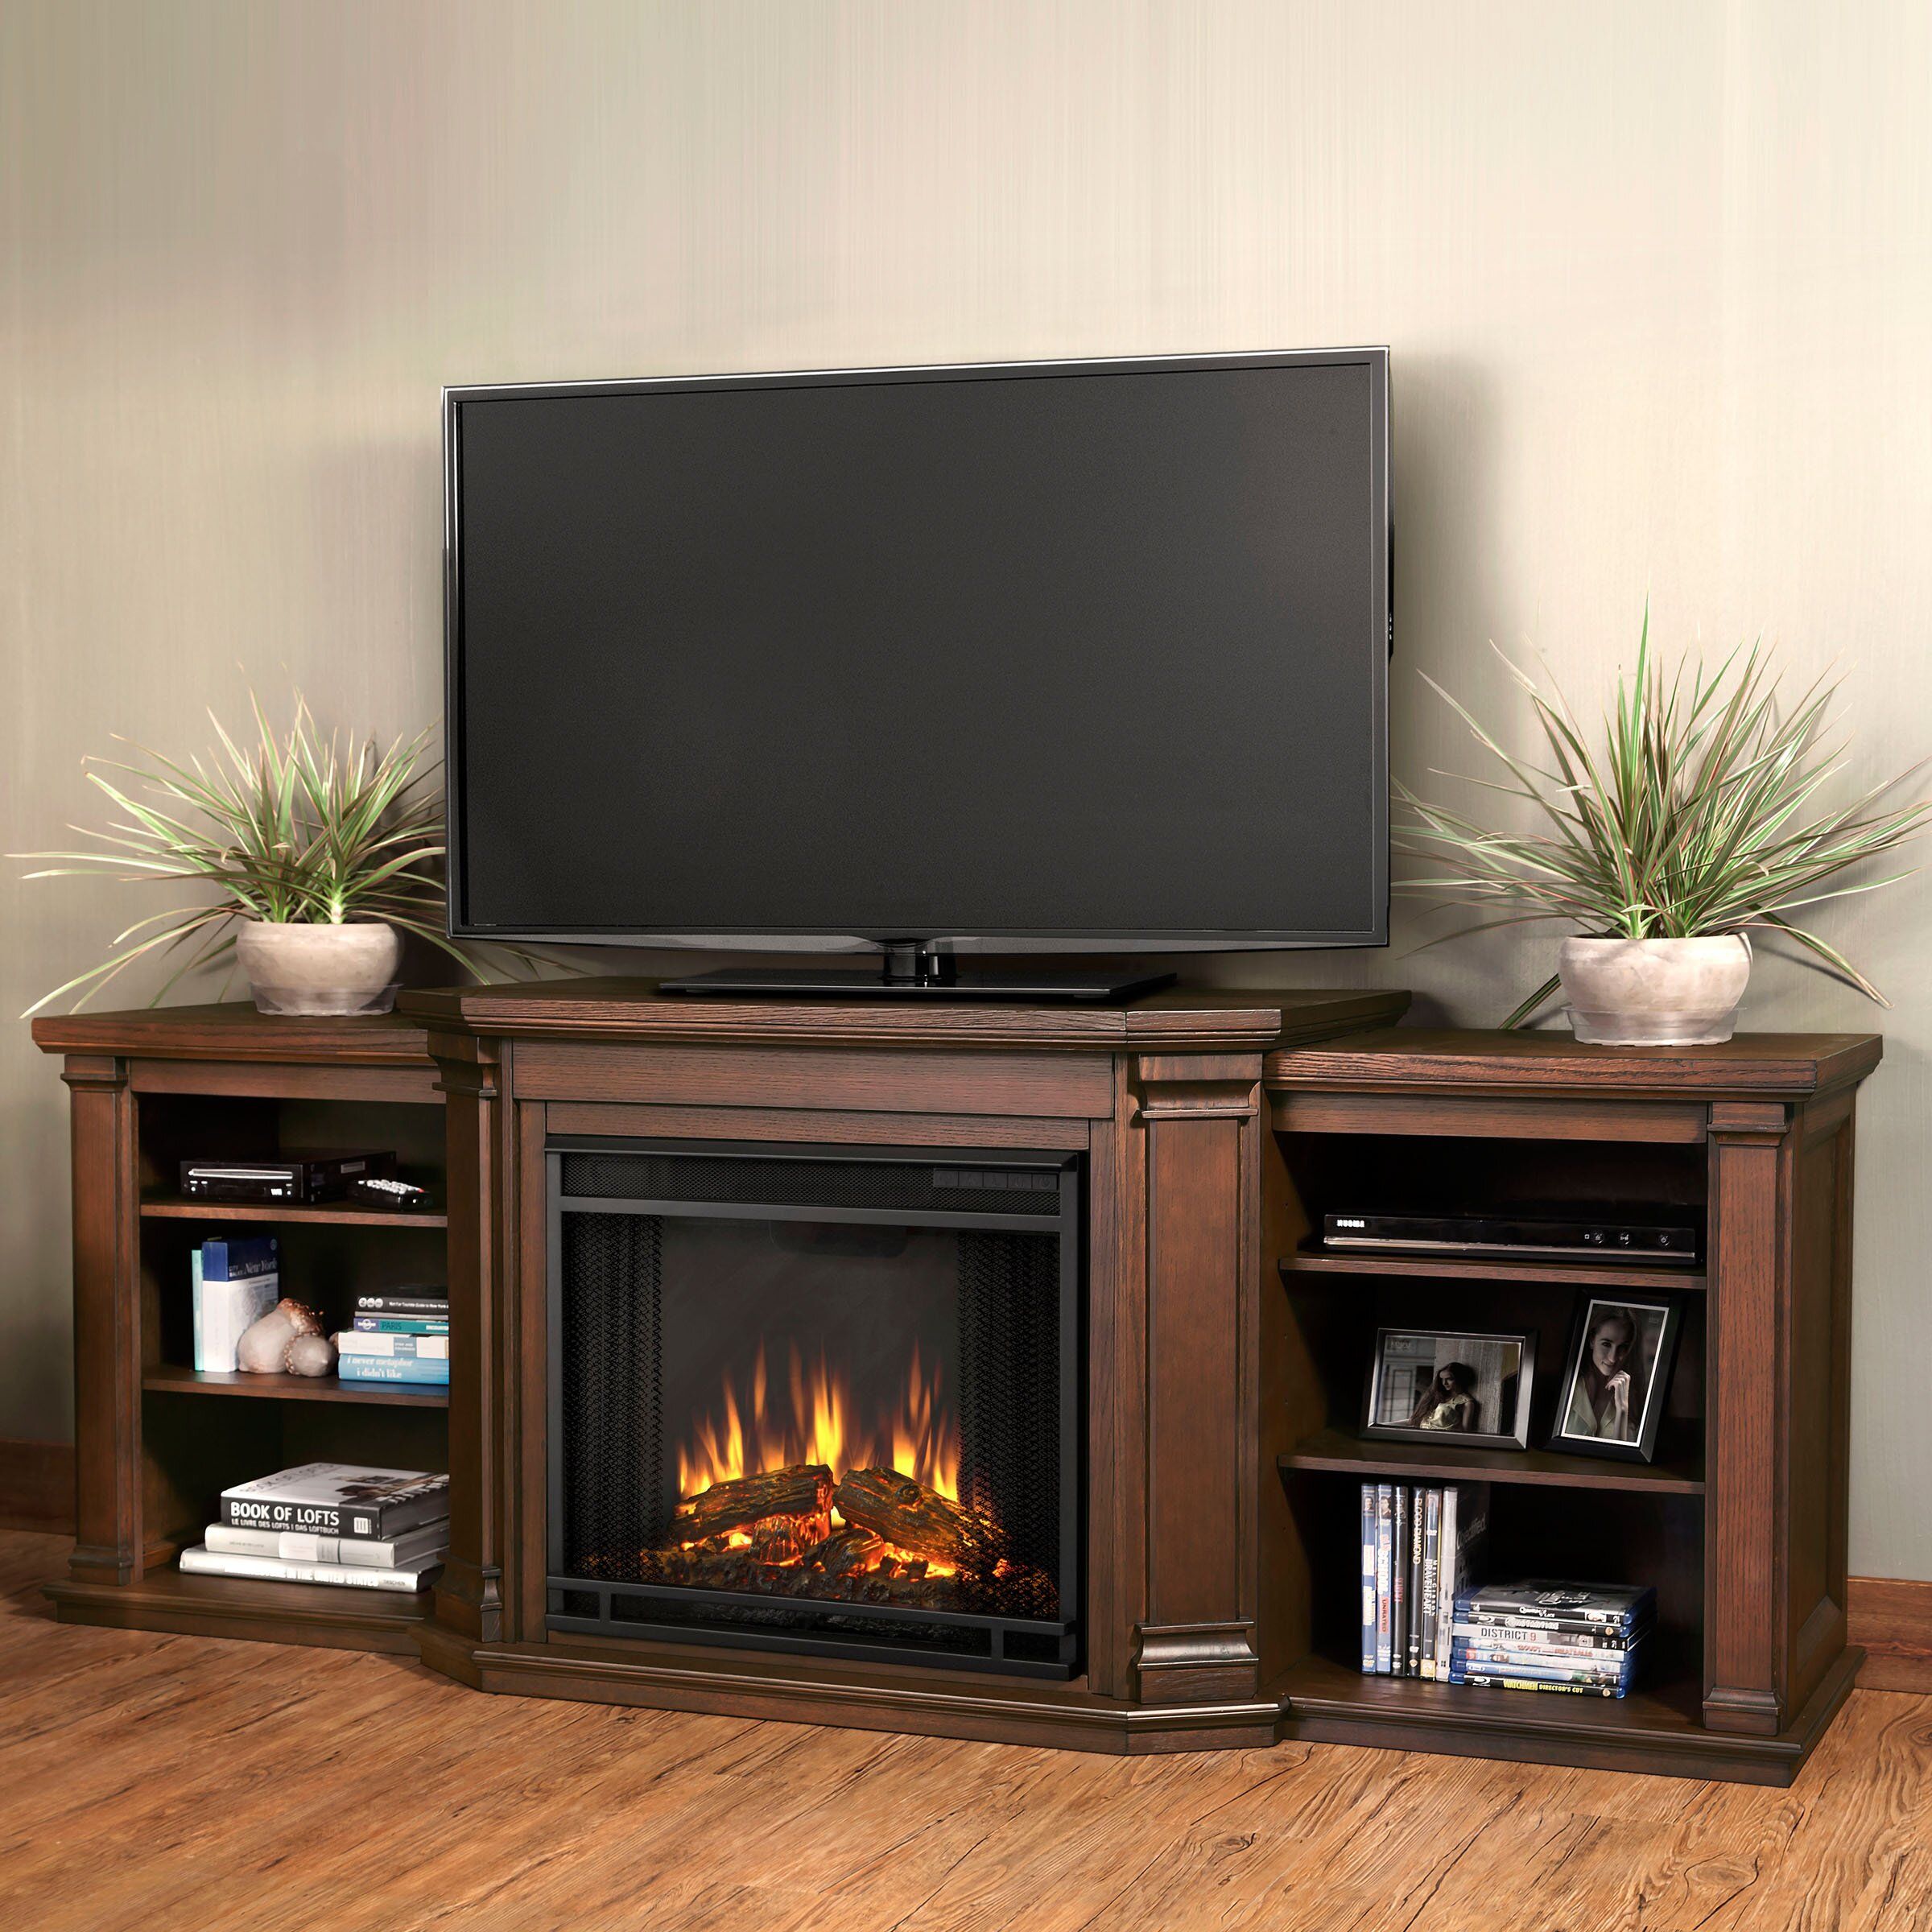 Real Flame Valmont Tv Stand With Electric Fireplace & Reviews | Wayfair For Tv Stands With Electric Fireplace (Gallery 1 of 20)